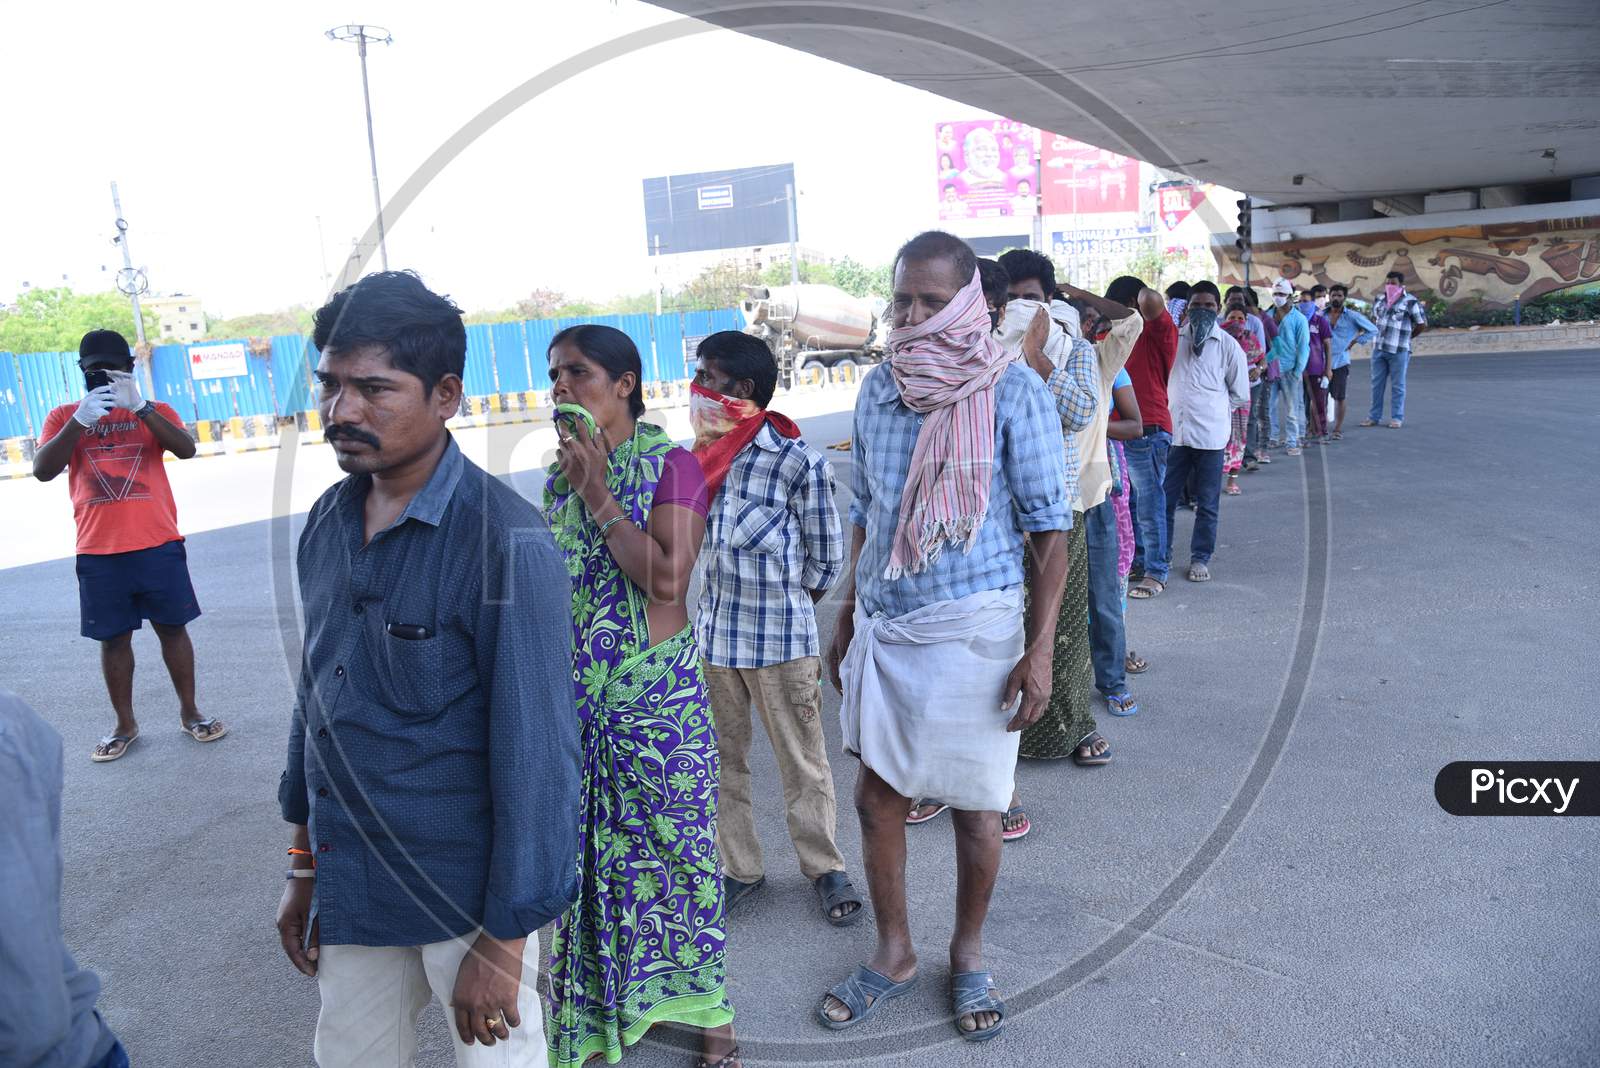 a migrant workers wait in line to collect food packets being distributed by some donors as they couldn't find food and work during nationwide lockdown amid coronavirus pandemic, April 8,2020, Hyderabad.